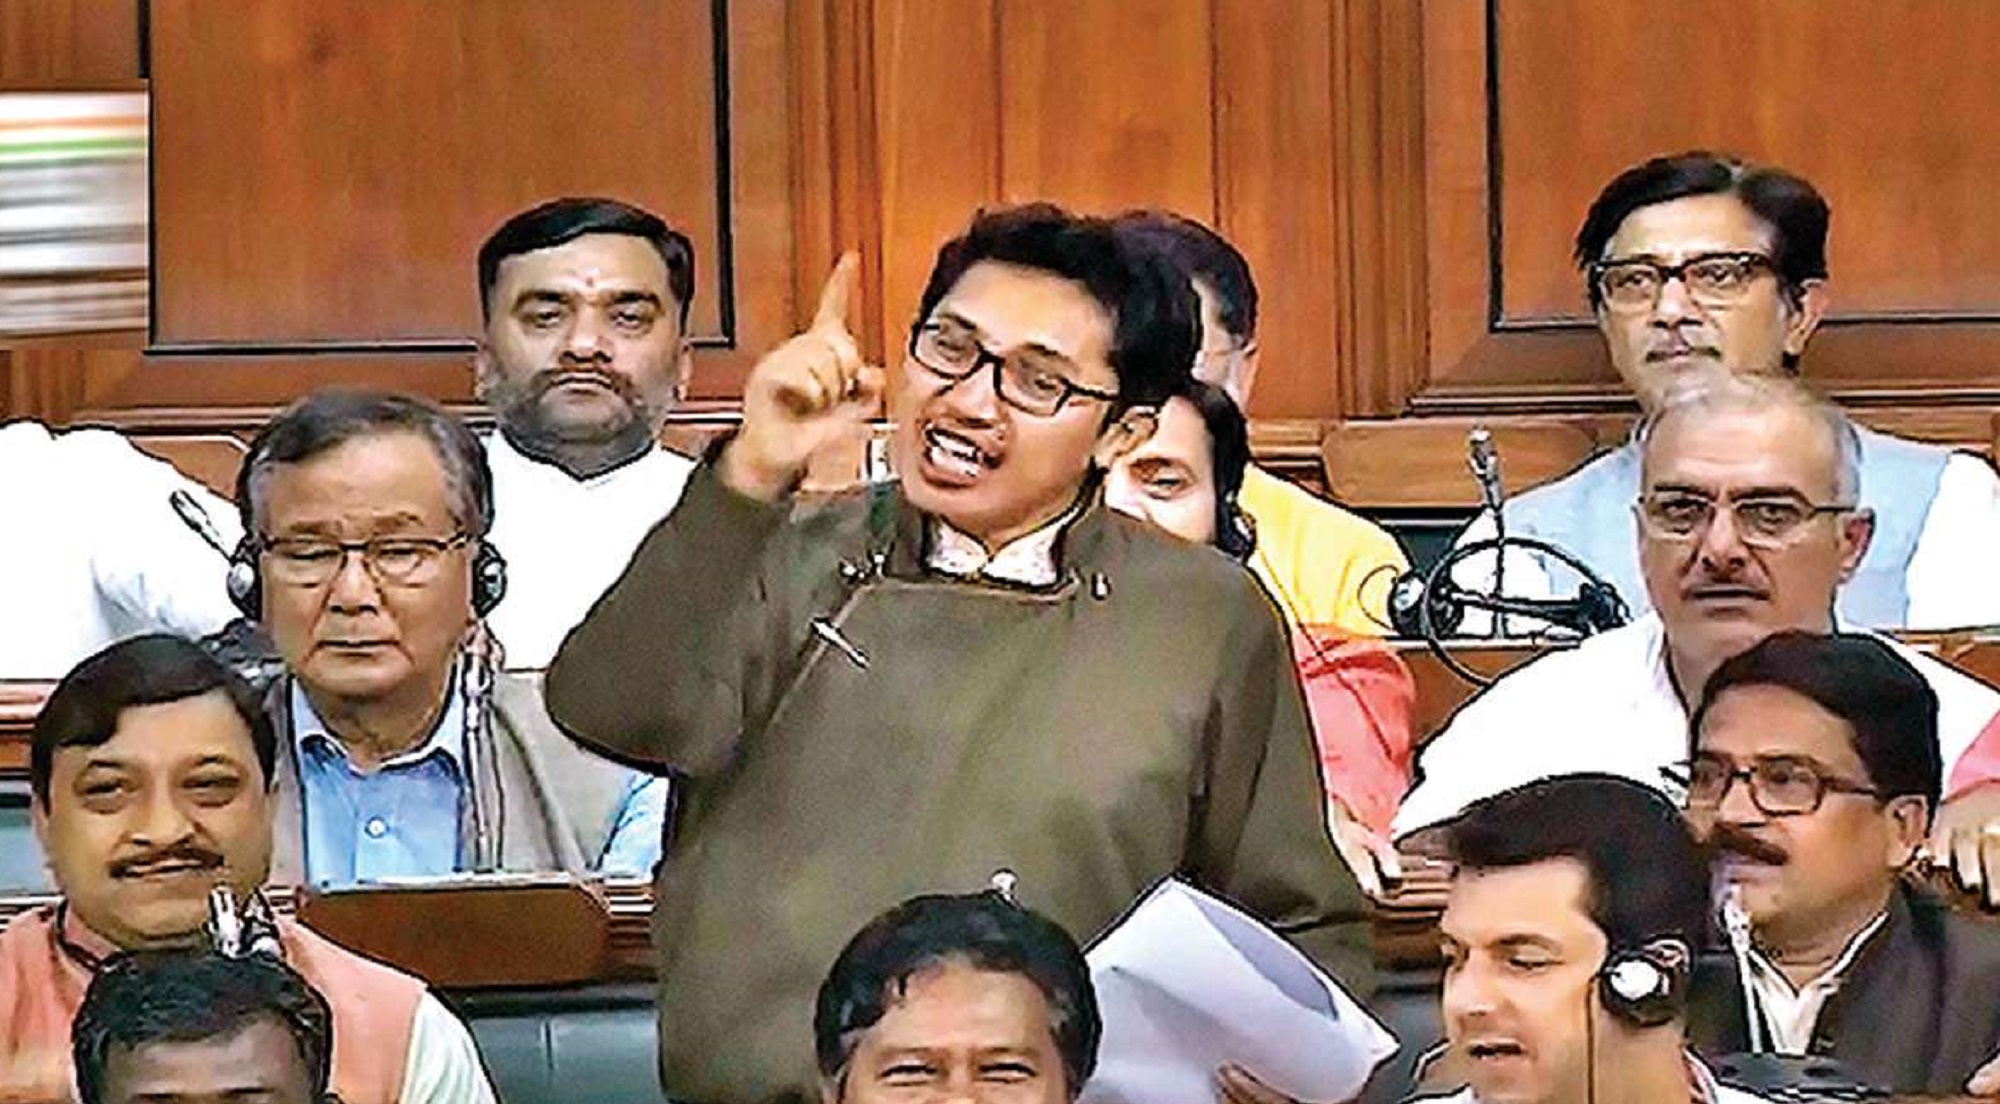 Ladakh MP’s Speech Supporting Article 370’s Removal from J&K Goes Viral. Watch here.